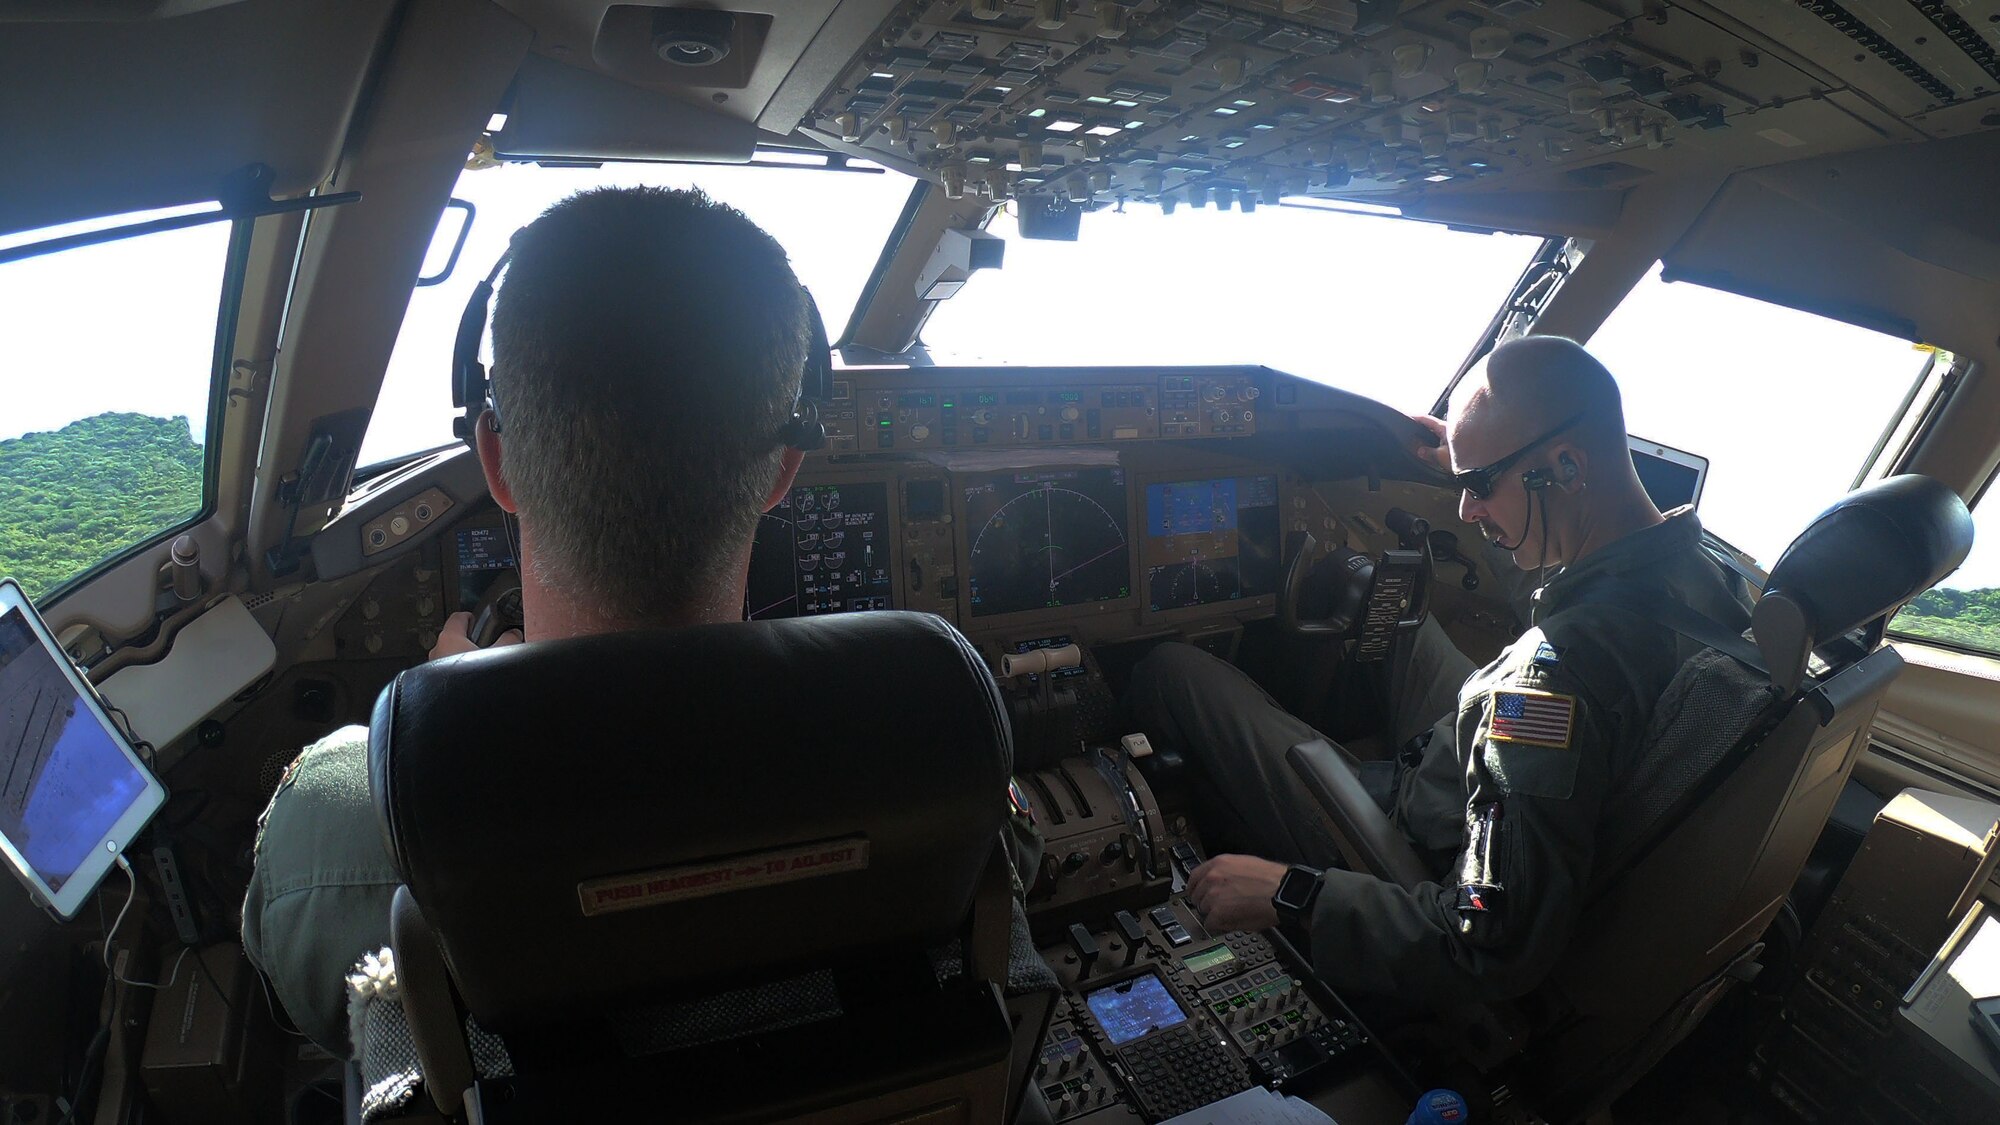 Maj. Timothy McBride (left) and Capt. Joe Schubert (right), 924th Air Refueling Squadron pilots, take off from Andersen Air Force Base, Guam, in a KC-46A Pegasus assigned to McConnell Air Force Base, Kansas, Aug. 18, 2020. The KC-46 flew to Andersen as part of the first McConnell-Reserve-lead cargo load mission. The KC-46 can carry 65,000 pounds of cargo.